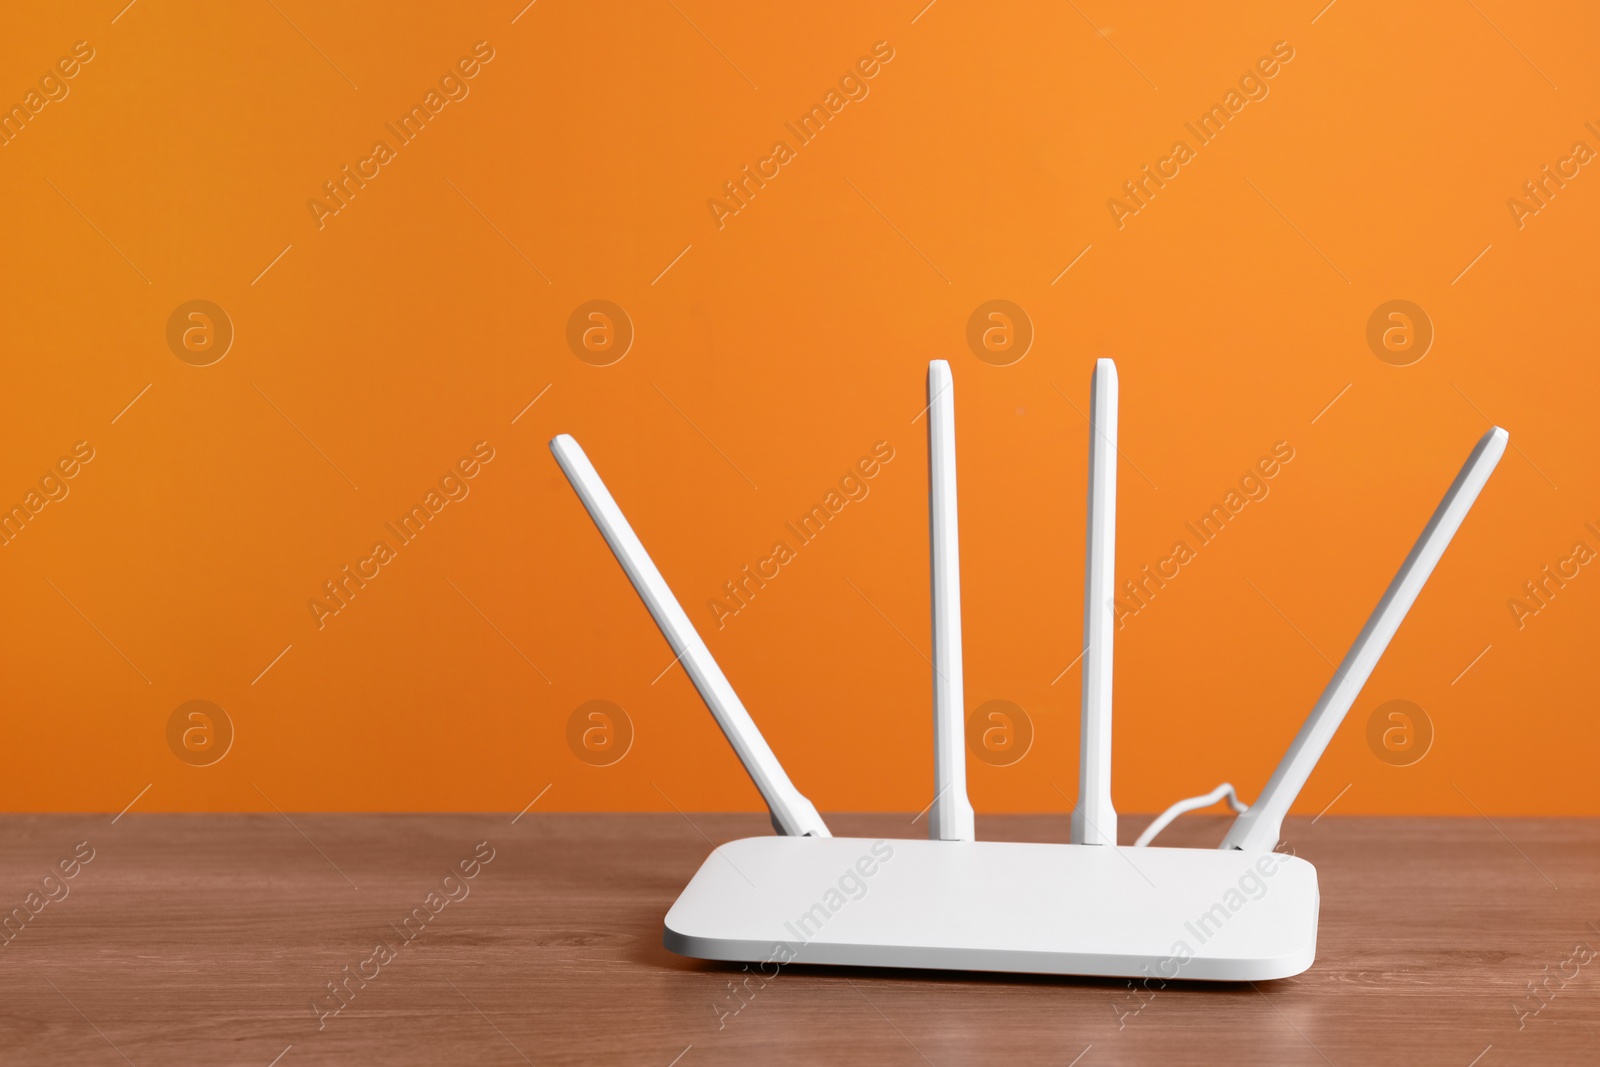 Photo of New modern Wi-Fi router on wooden table near orange wall, space for text